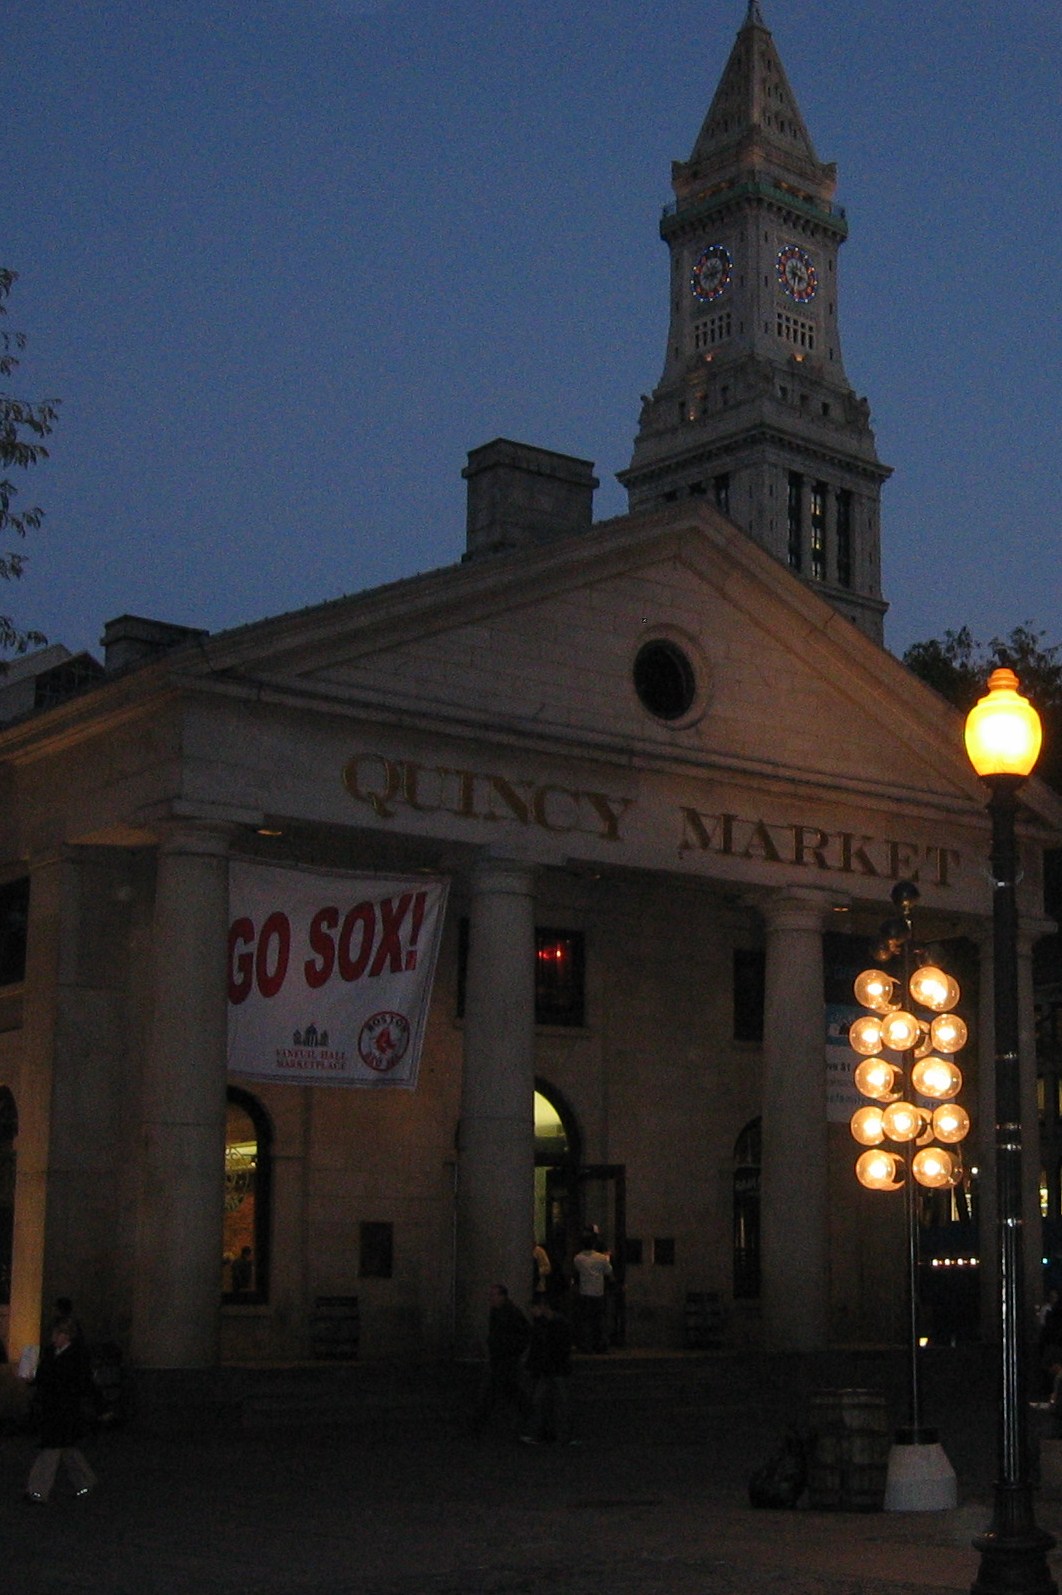 Quincy Market (user submitted)